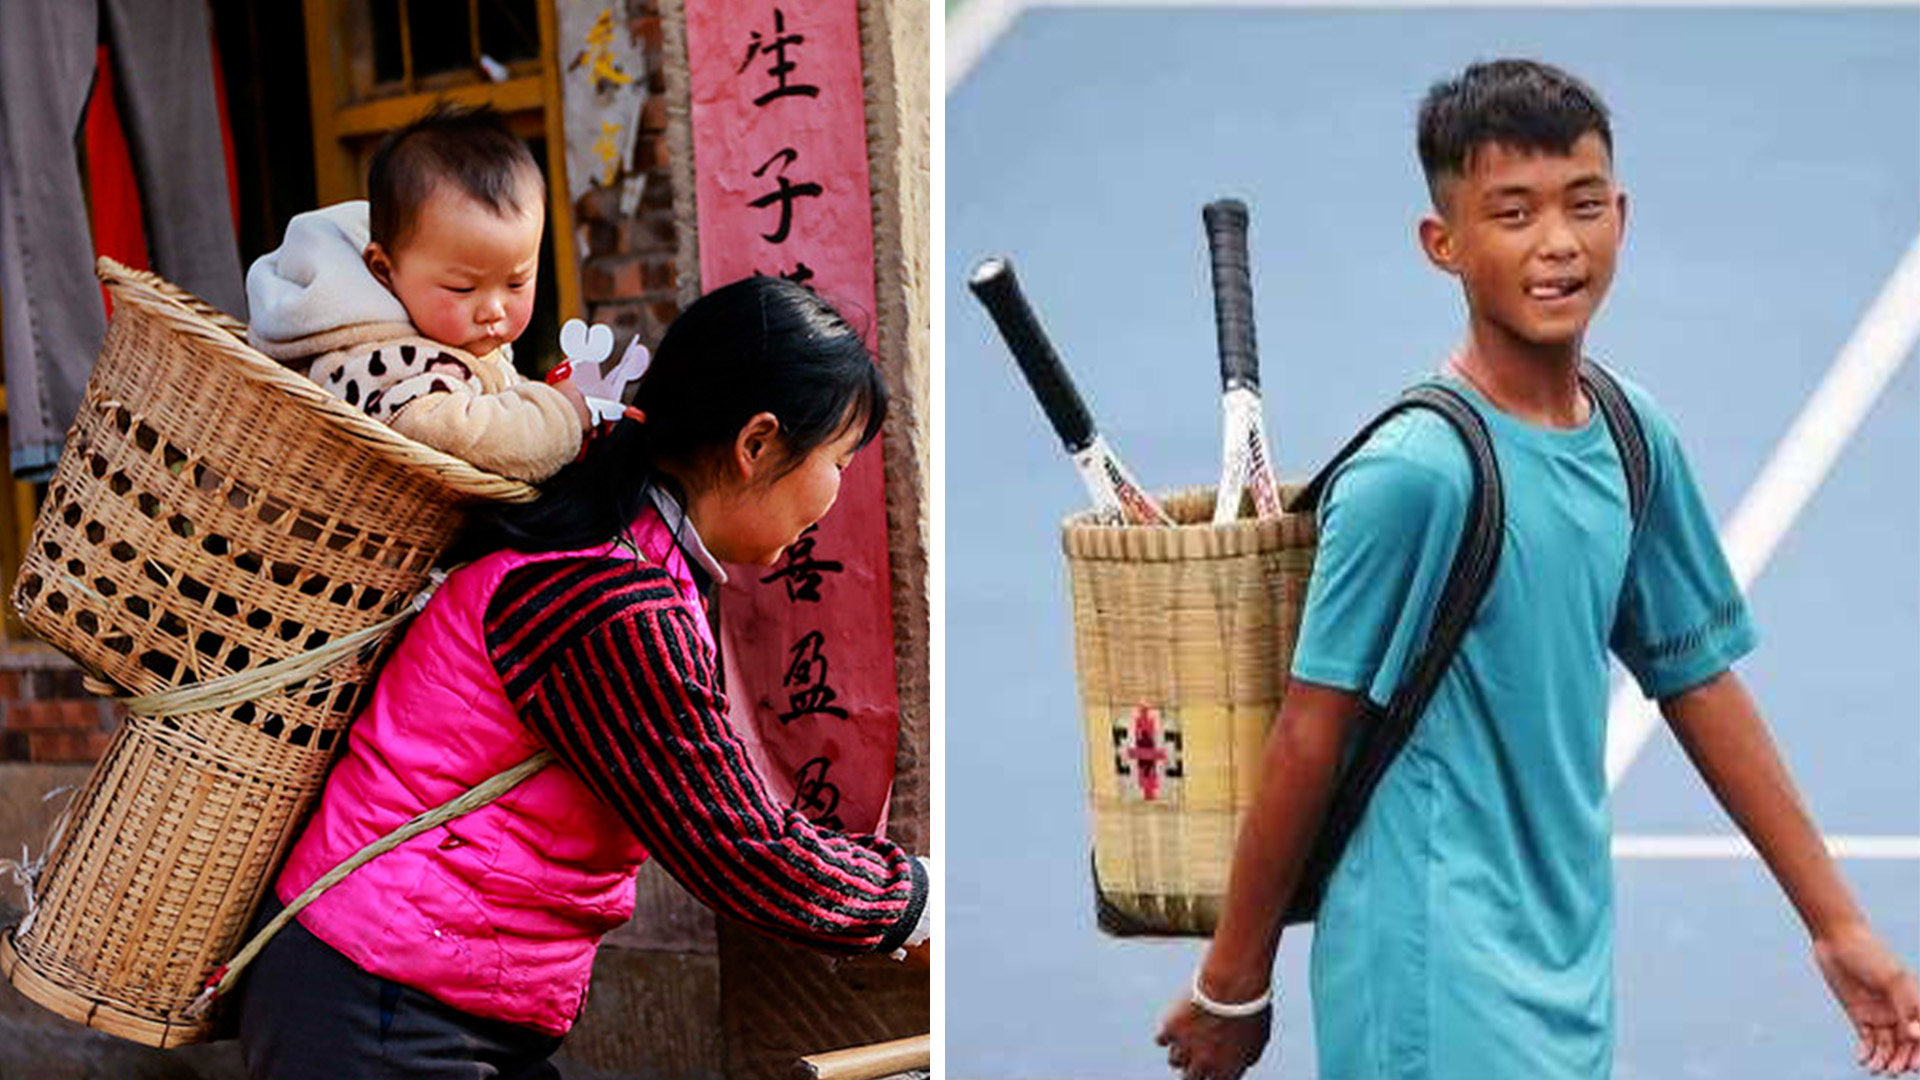 A rising teen tennis star from the Wa ethnic group who carries his racquets in a traditional bamboo basket is a social media darling in China. Photo: SCMP composite